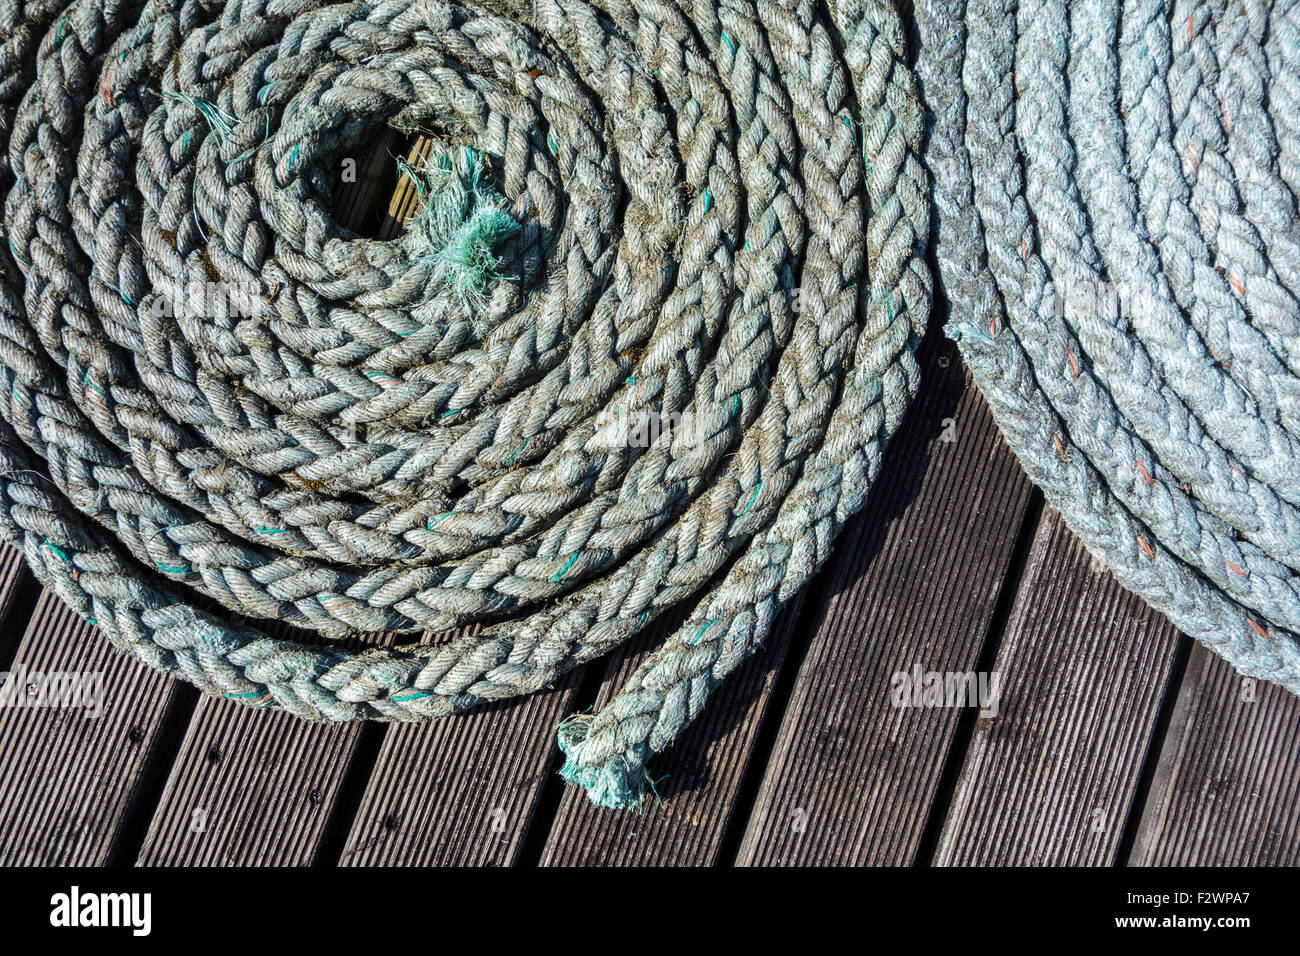 Close up of two coiled braided ropes / plaited hawsers on deck of boat Stock Photo